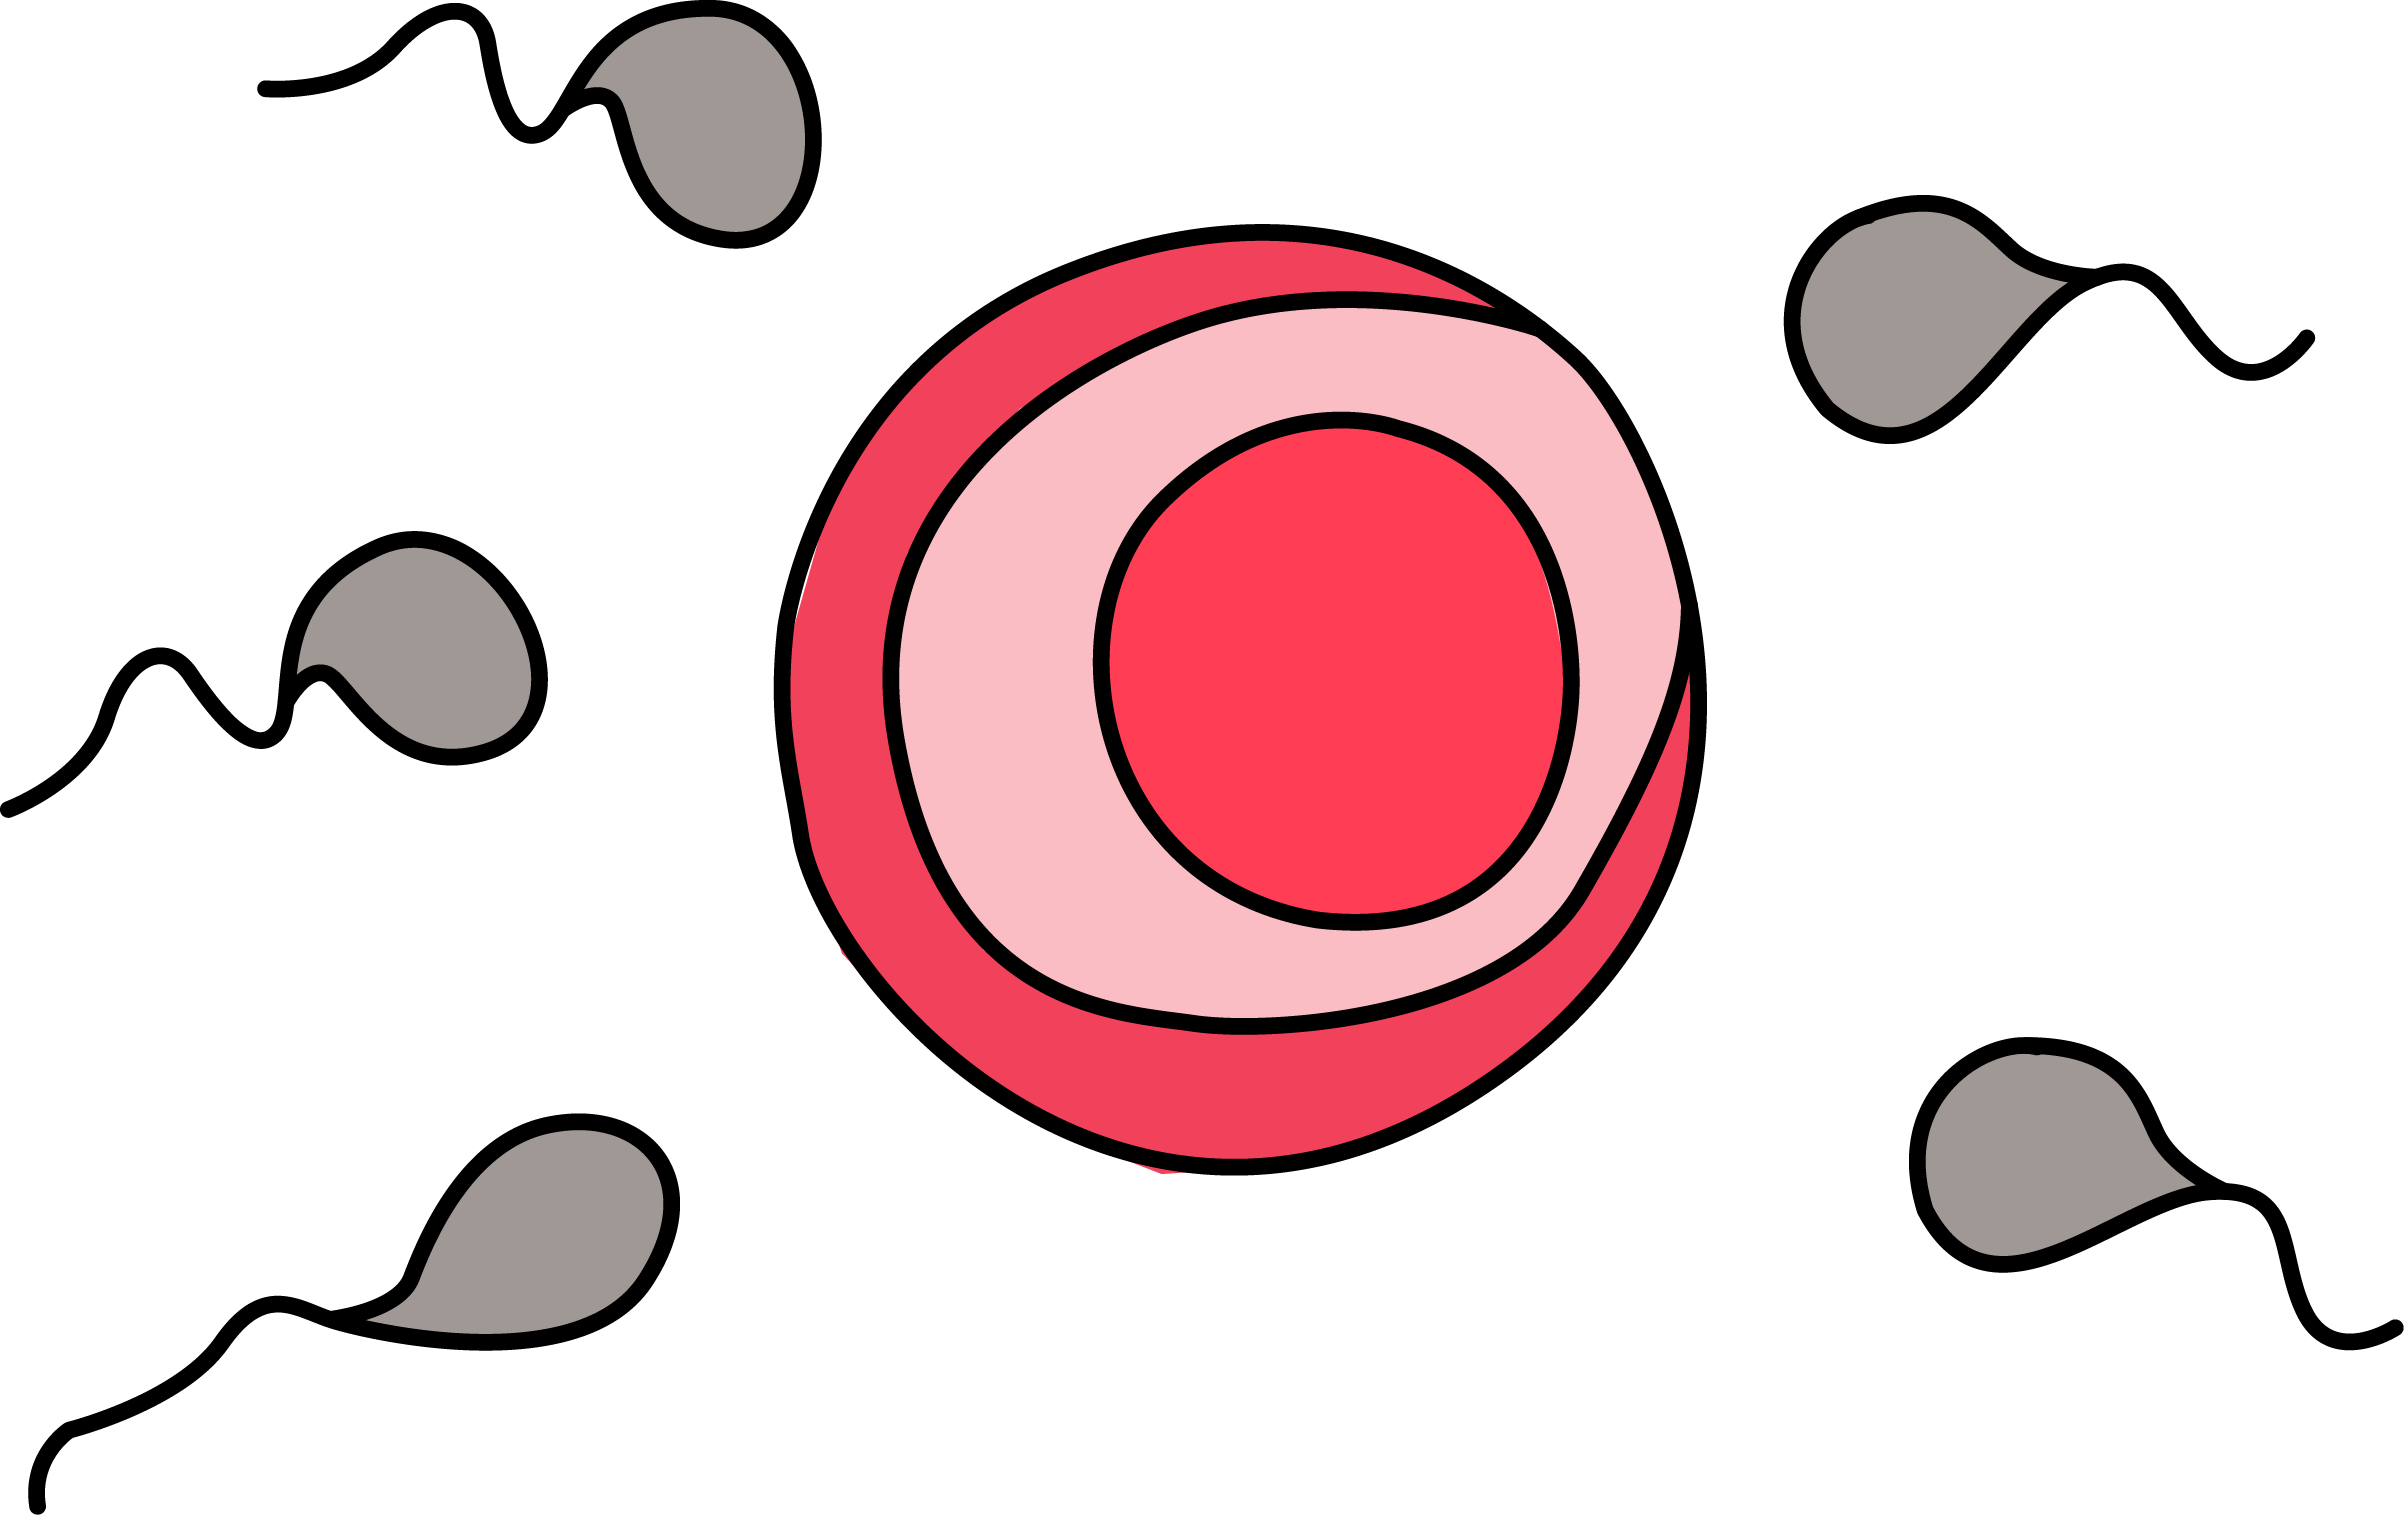 A Red Circle With Grey And White Dots